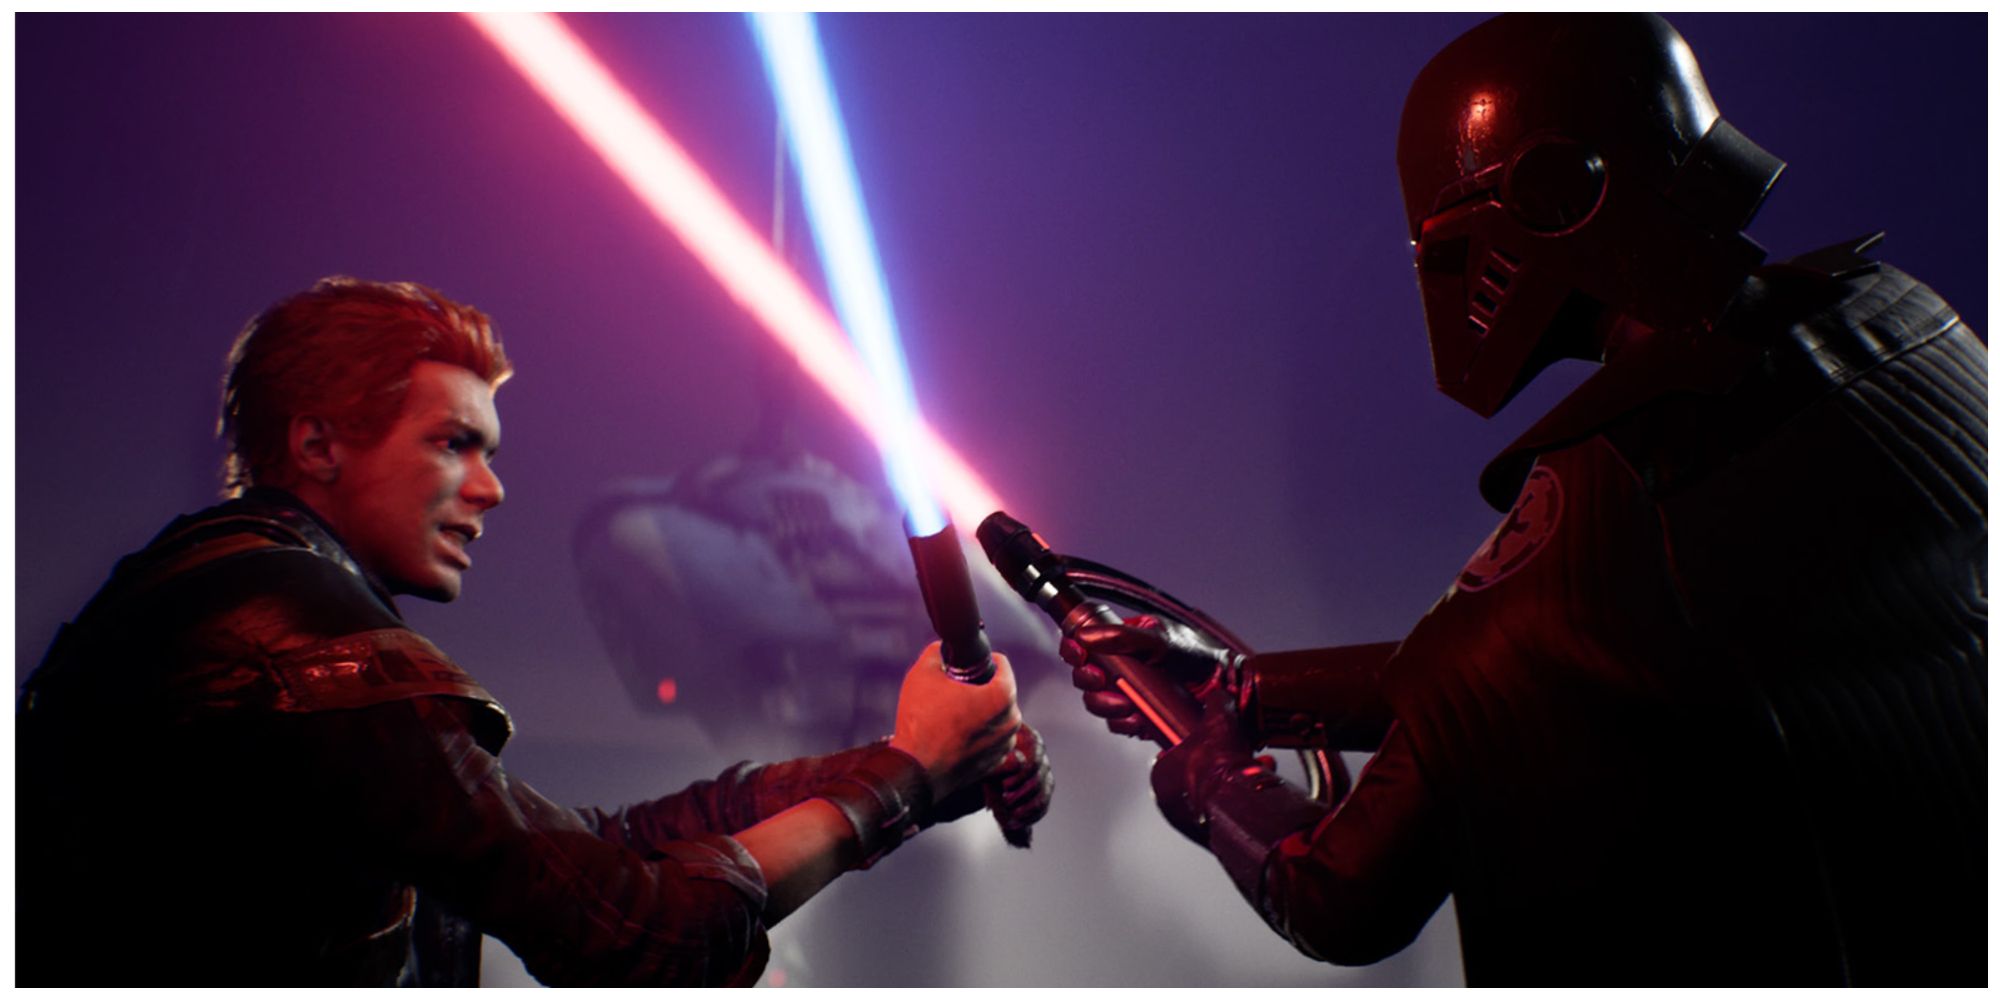 Cal Kestis and Second Sister Trilla from Star Wars Jedi: Fallen Order engaged in a lightsaber duel